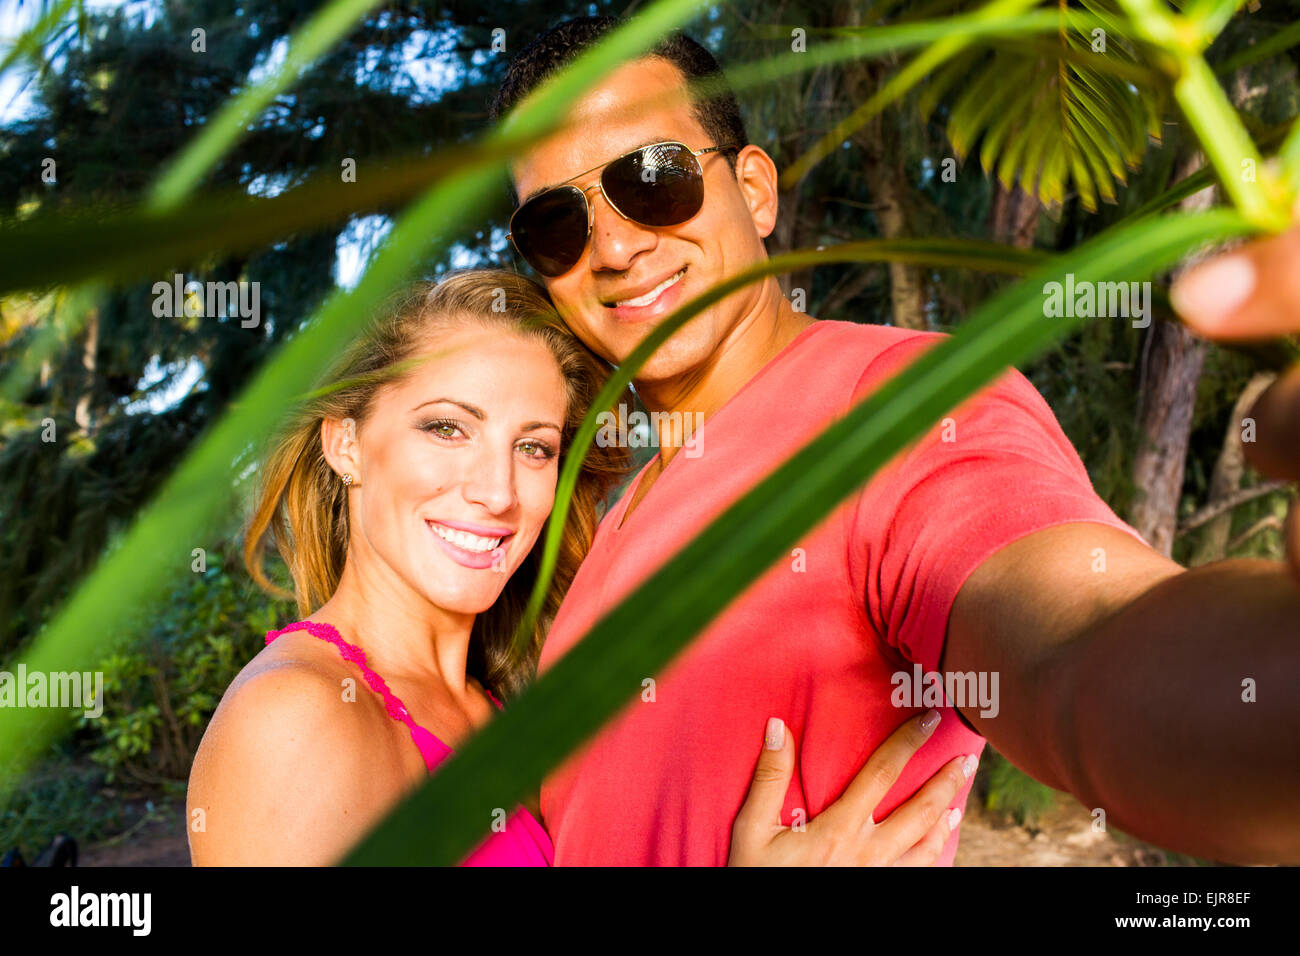 Smiling couple hugging behind palm frond leaves Stock Photo